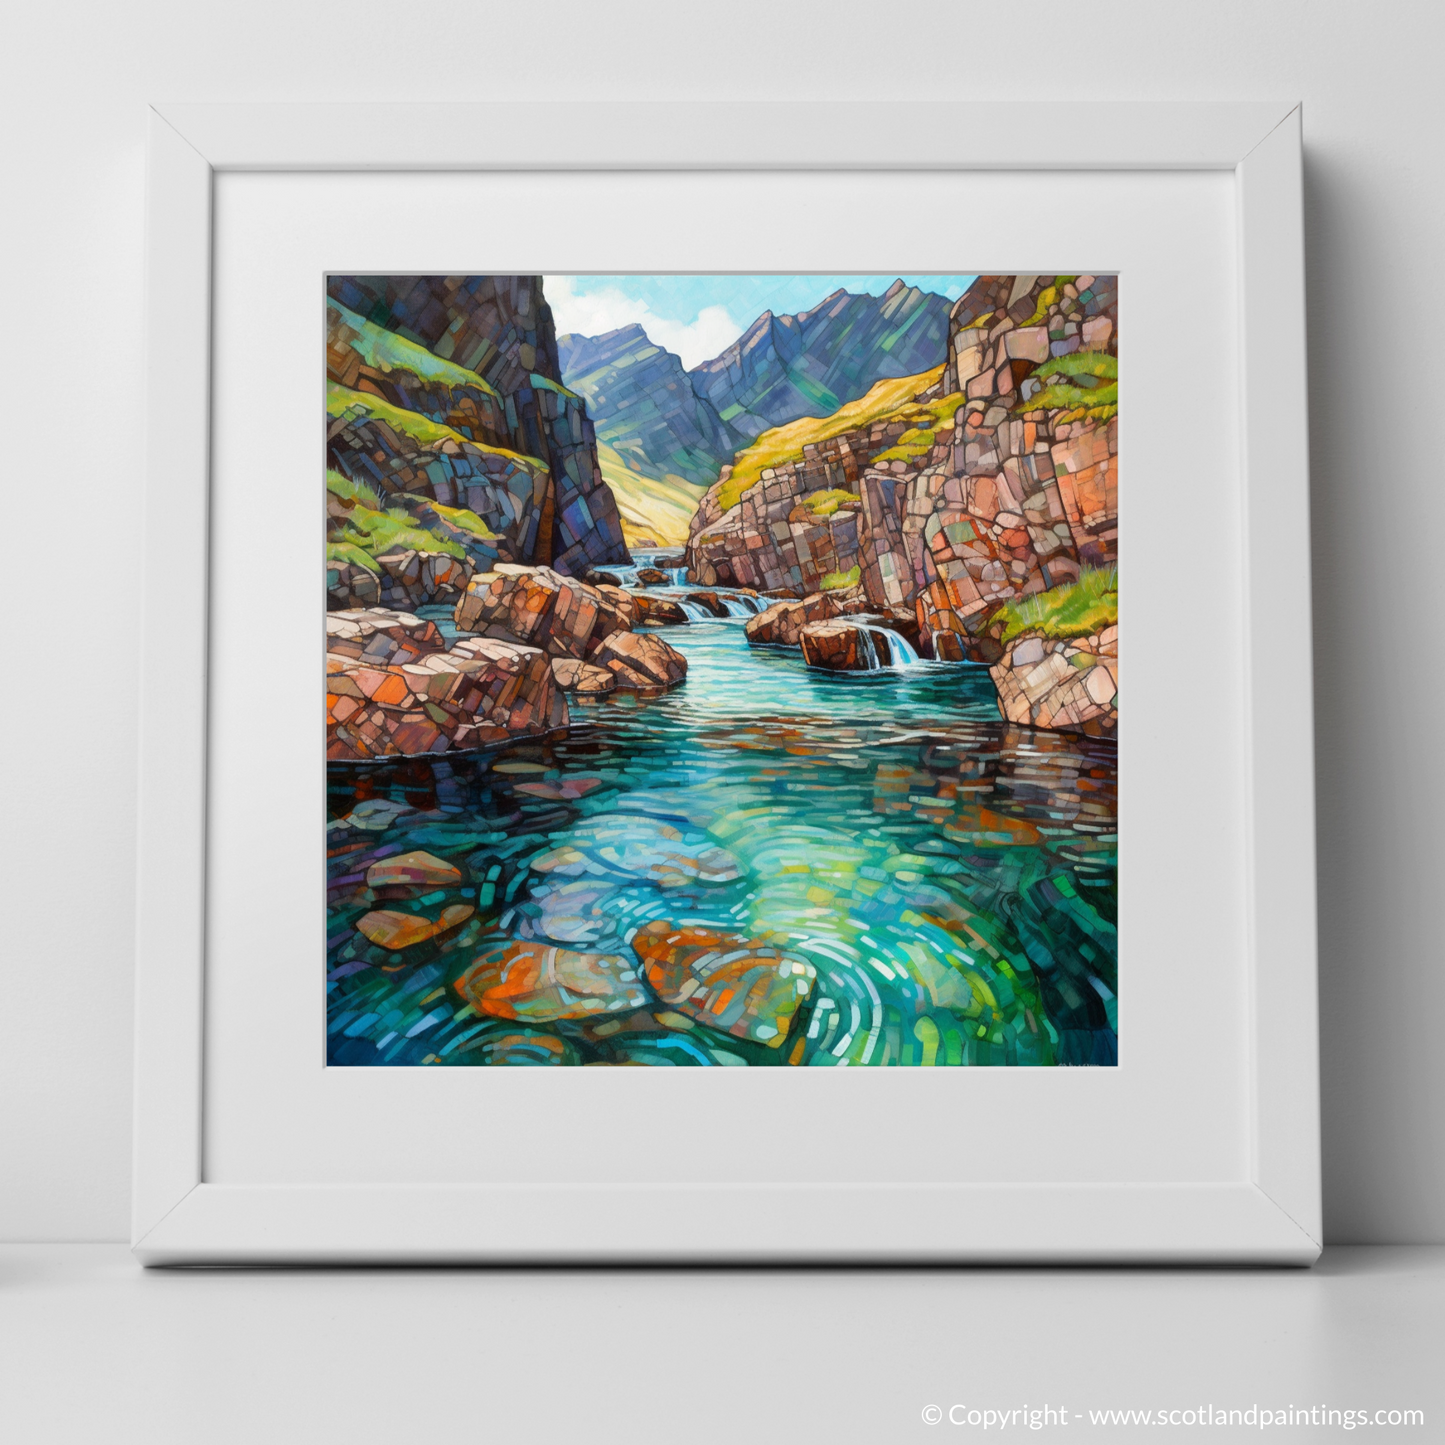 Enchanted Waters of the Fairy Pools: A Modern Impressionist Ode to Scottish Coves